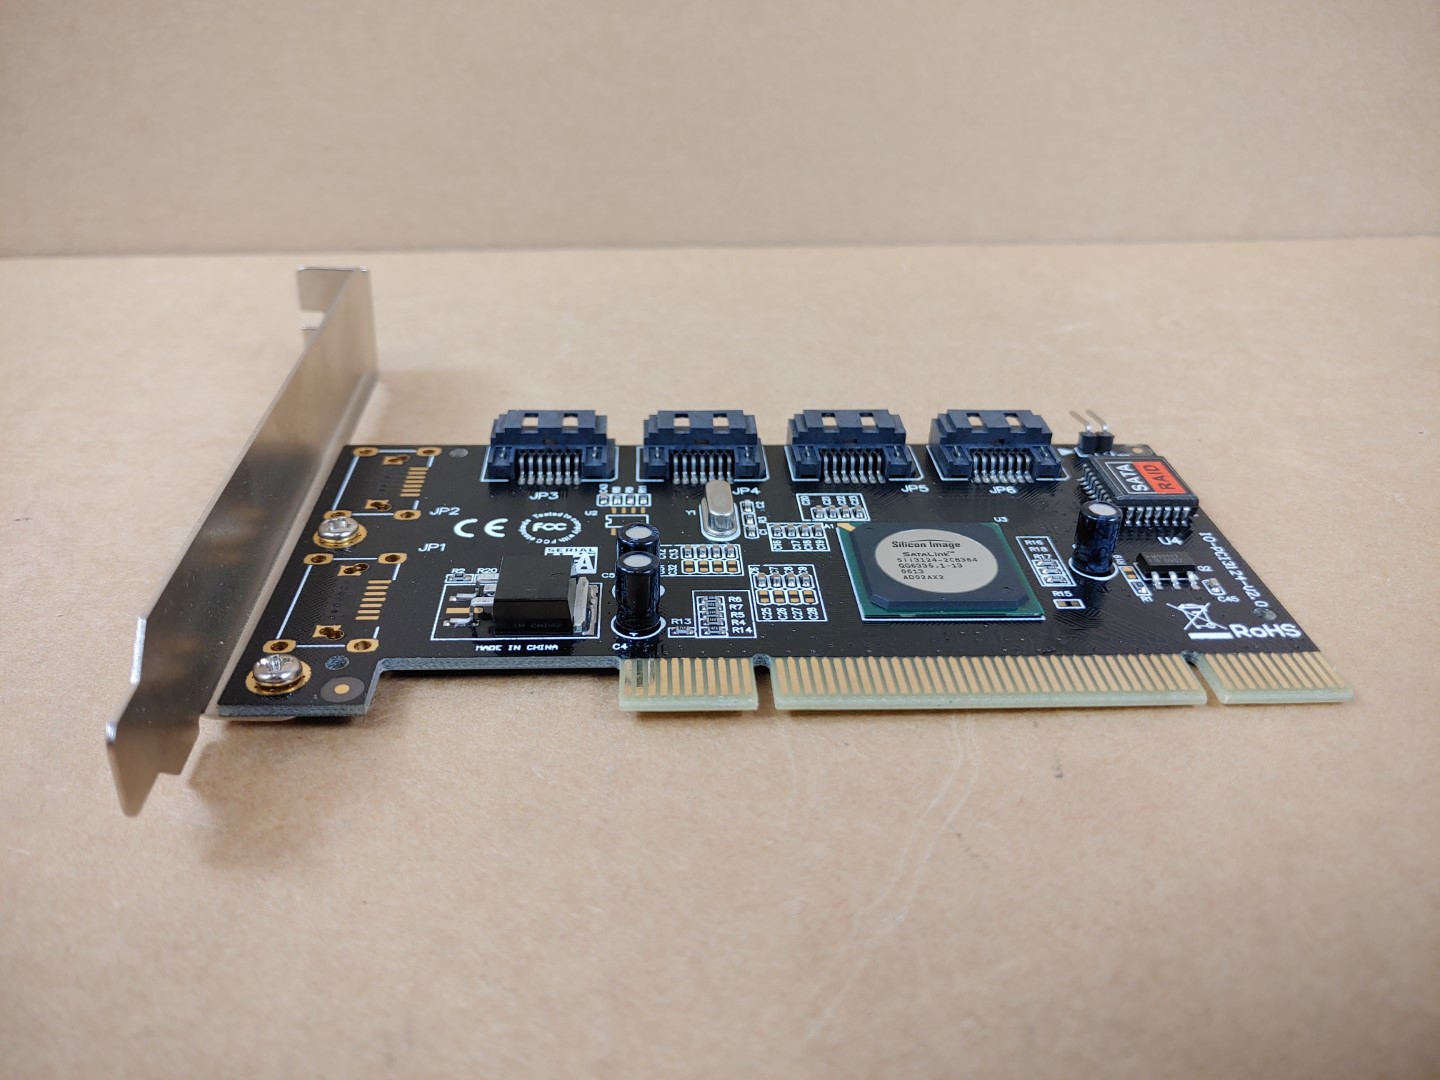 Good condition! Tested and pulled from a working environment! Item Specifics: MPN : SY-PCI40010UPC : N/AType : Raid CardBrand : SybaModel : SY-PCI40010 - 2